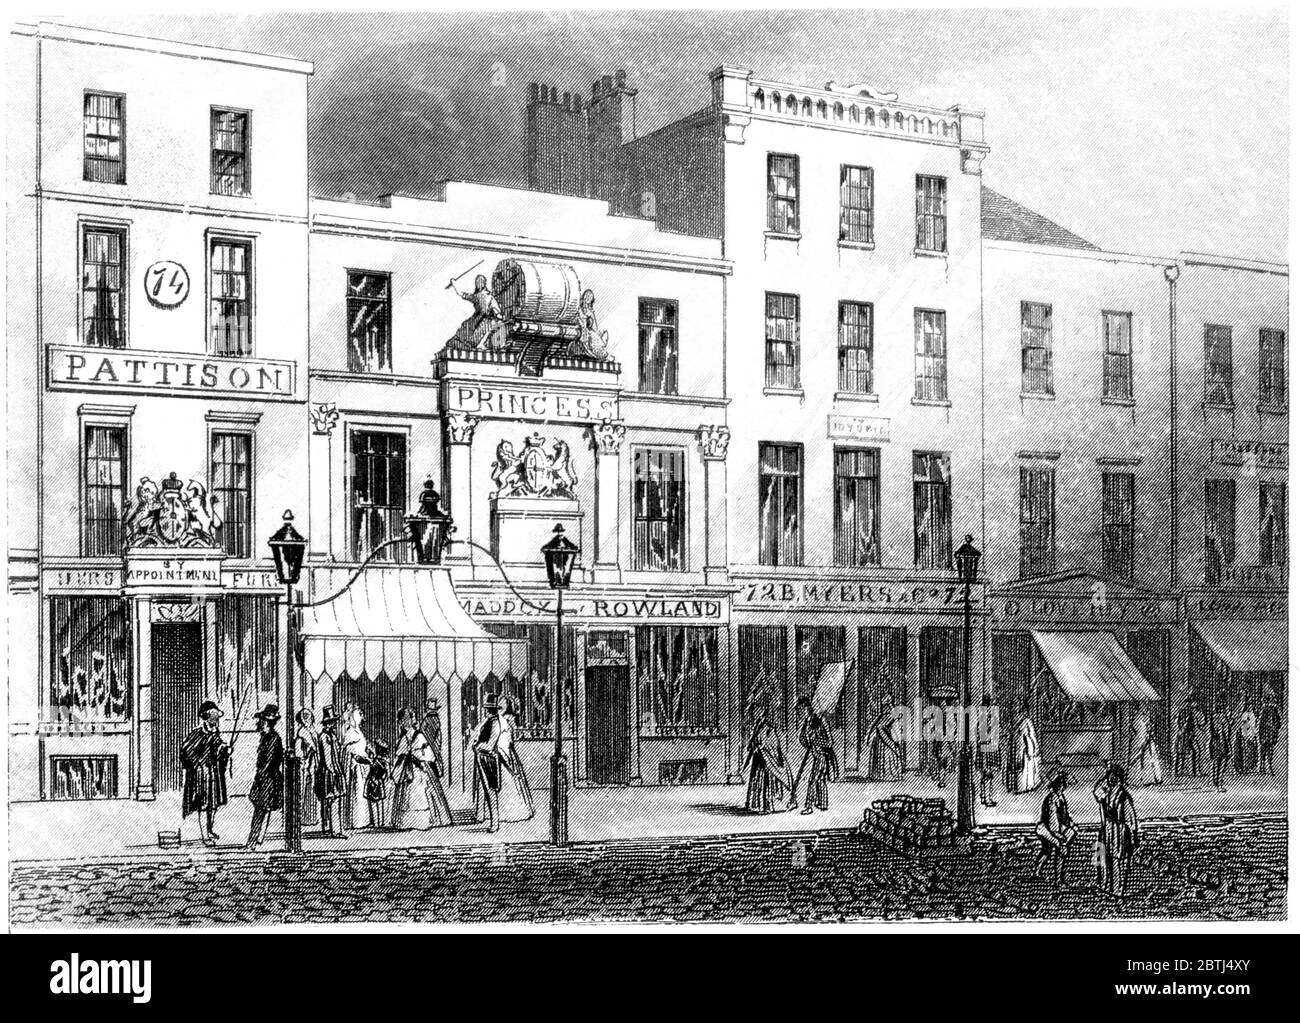 Engraving of The Princess Theatre London scanned at high resolution from a book printed in 1851. This image is believed to be free of all copyright. Stock Photo